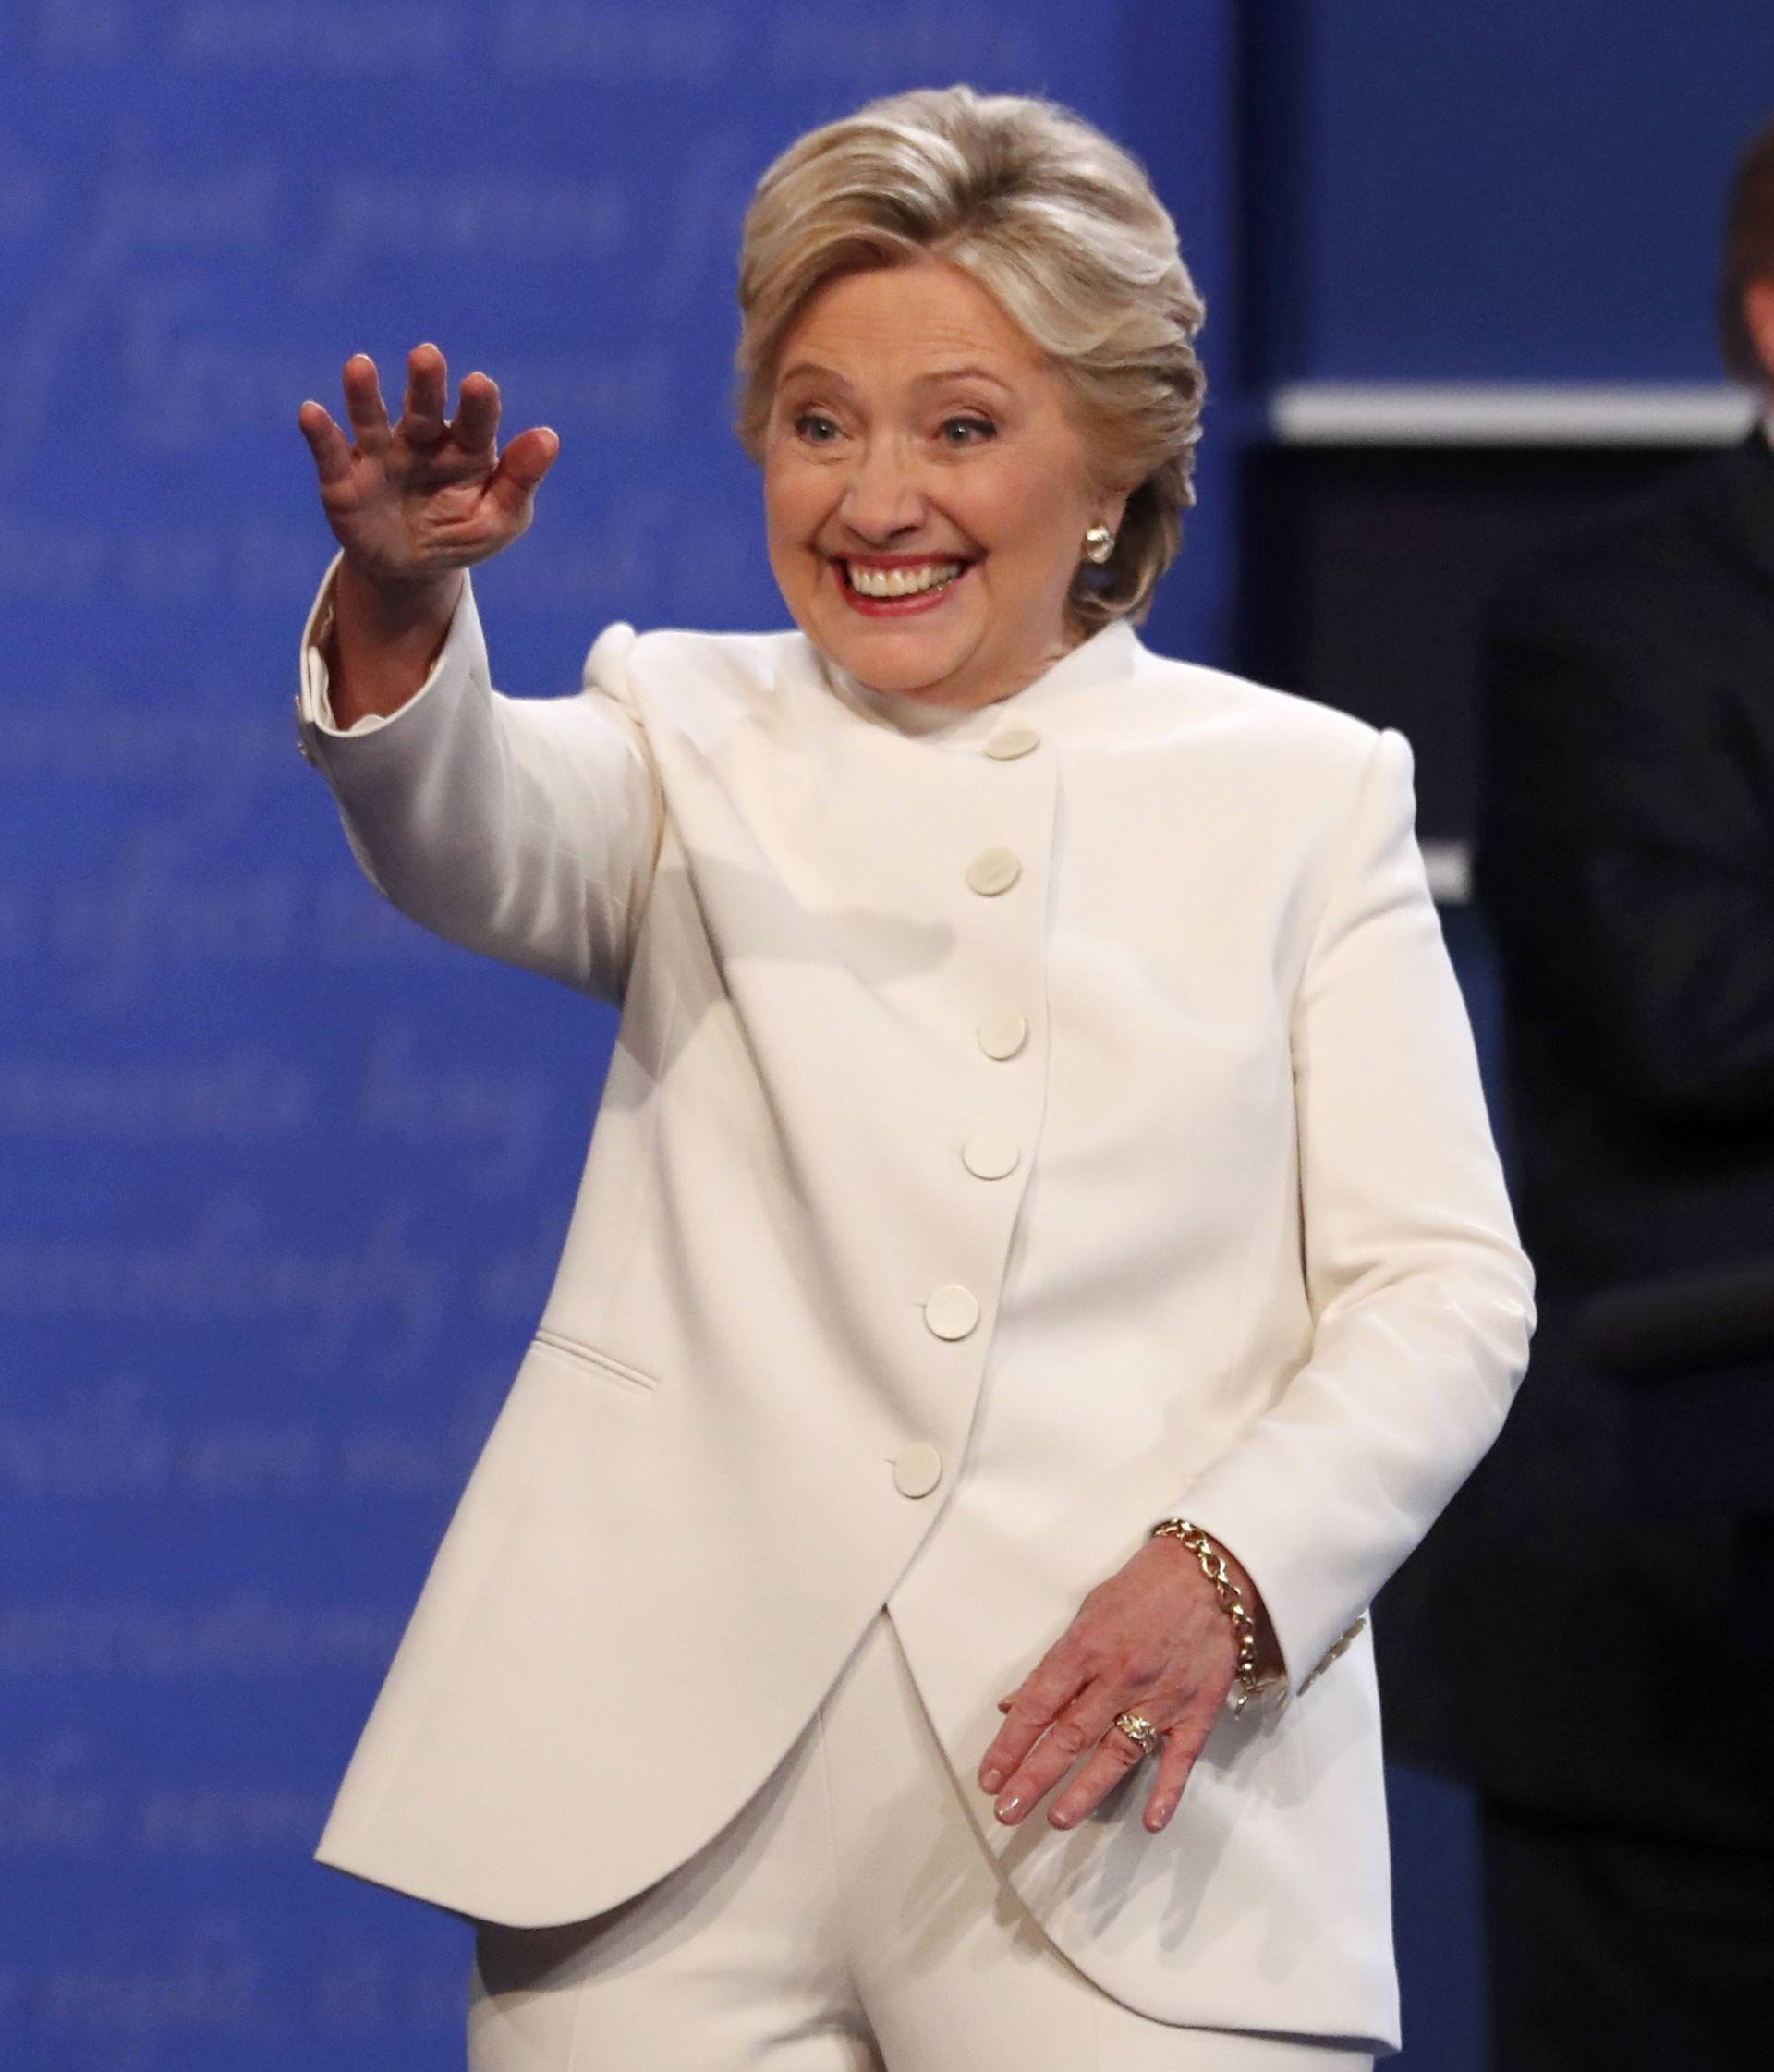 Democratic U.S. presidential nominee Clinton walks off the debate stage as Republican U.S. presidential nominee Trump remains at his podium after the conclusion of their third and final 2016 presidential campaign debate in Las Vegas